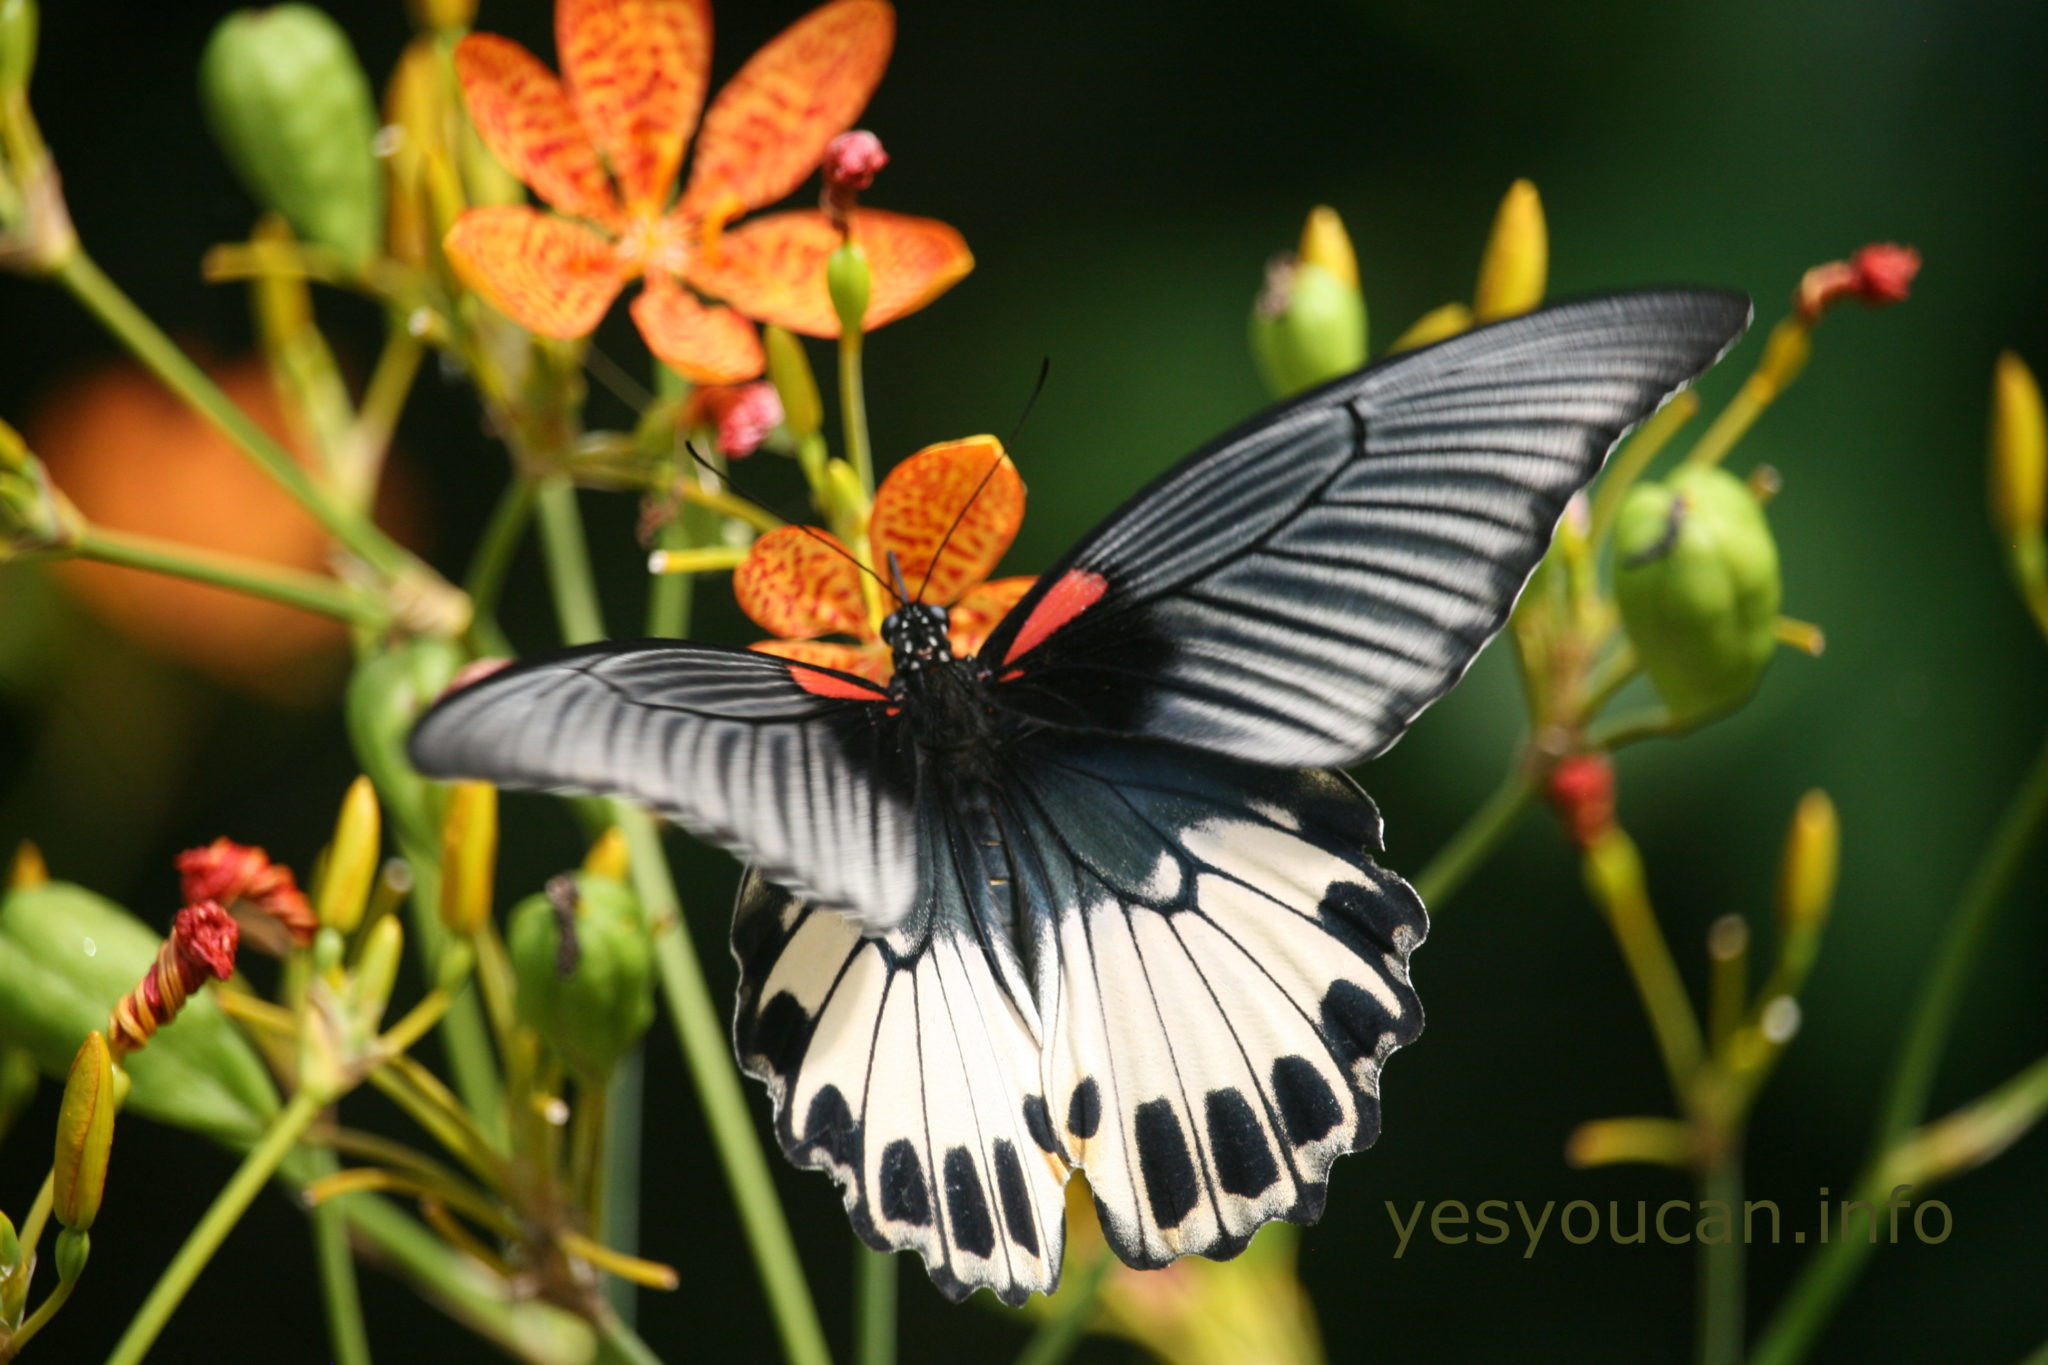 Tips for when to go out looking for butterflies – Jiannan Trail, Taipei